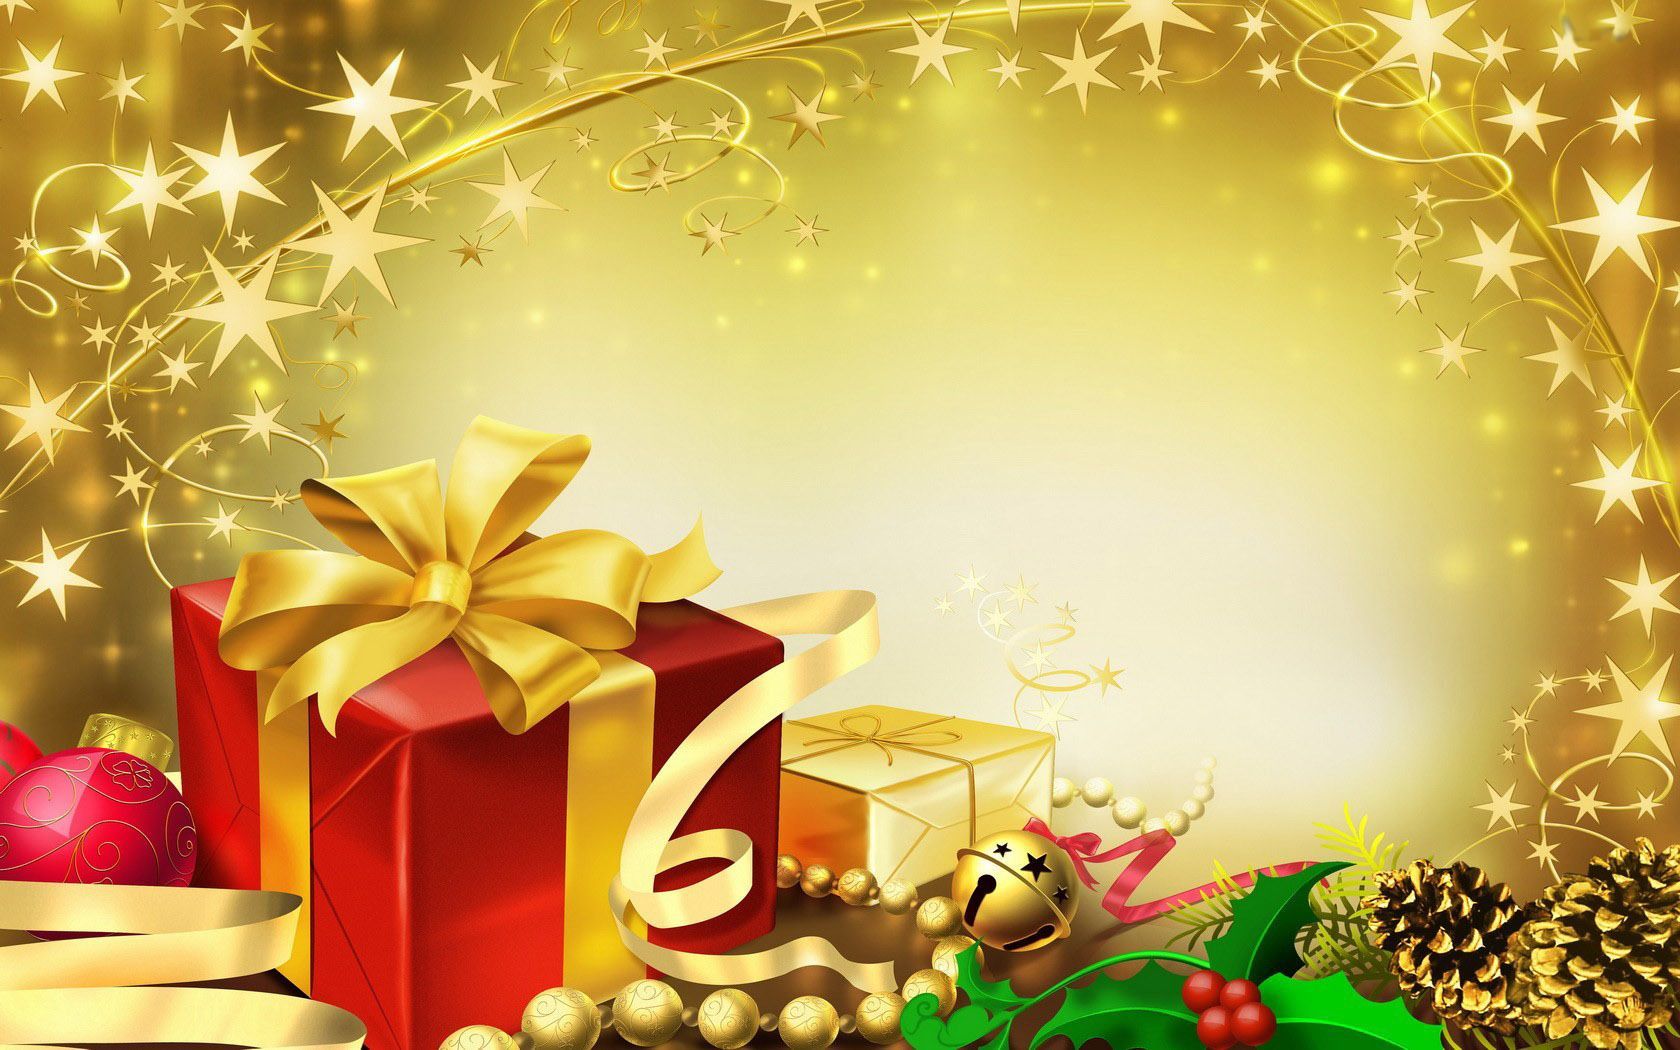 Free Christmas Backgrounds Pictures - Wallpaper Cave